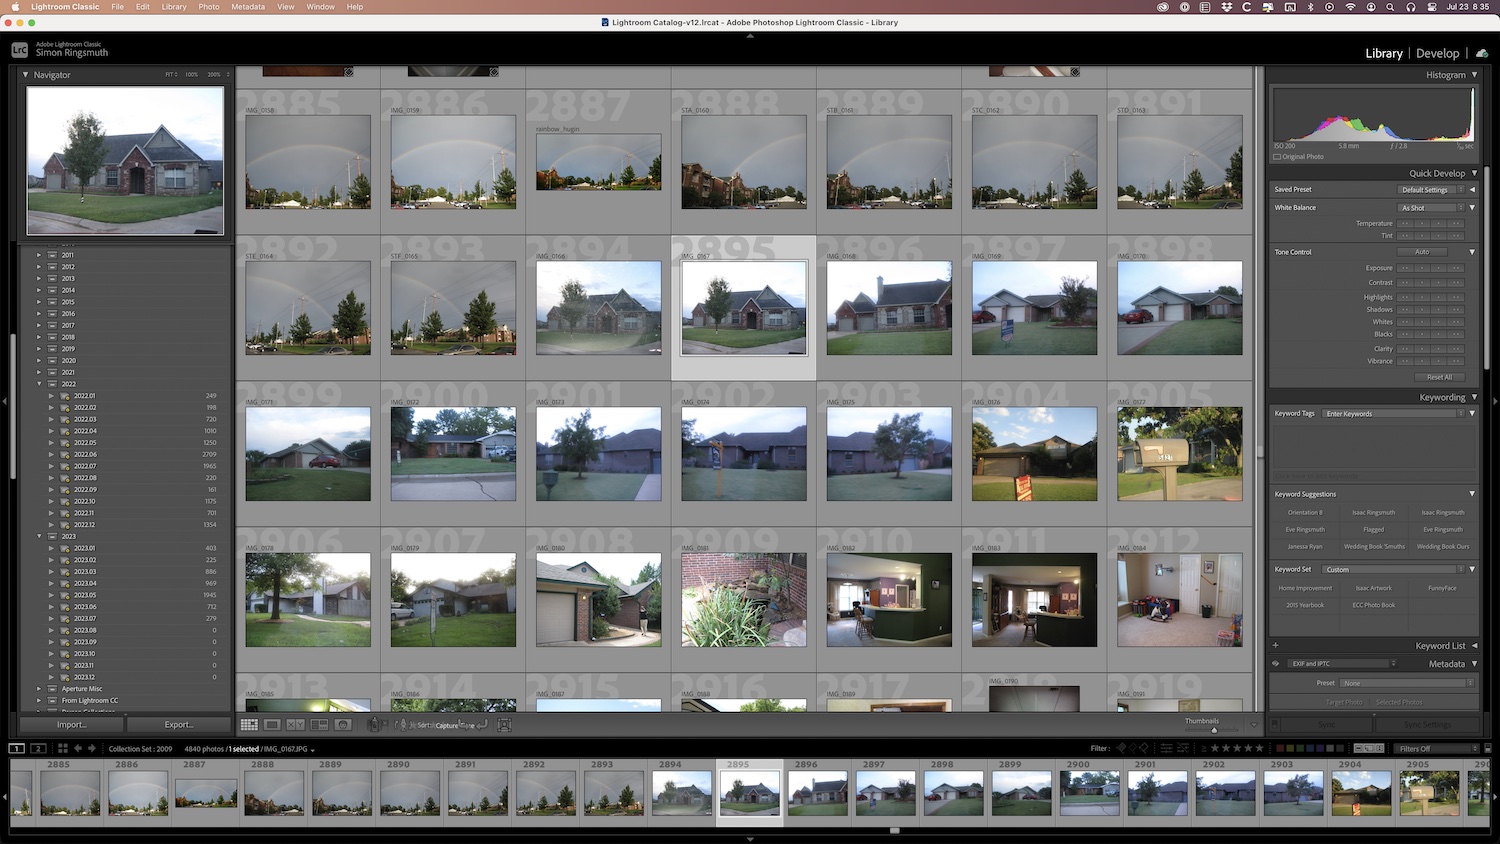 Lightroom vs. Lightroom Classic: The Library interface of Lightroom Classic with dozens of image thumbnails shown.